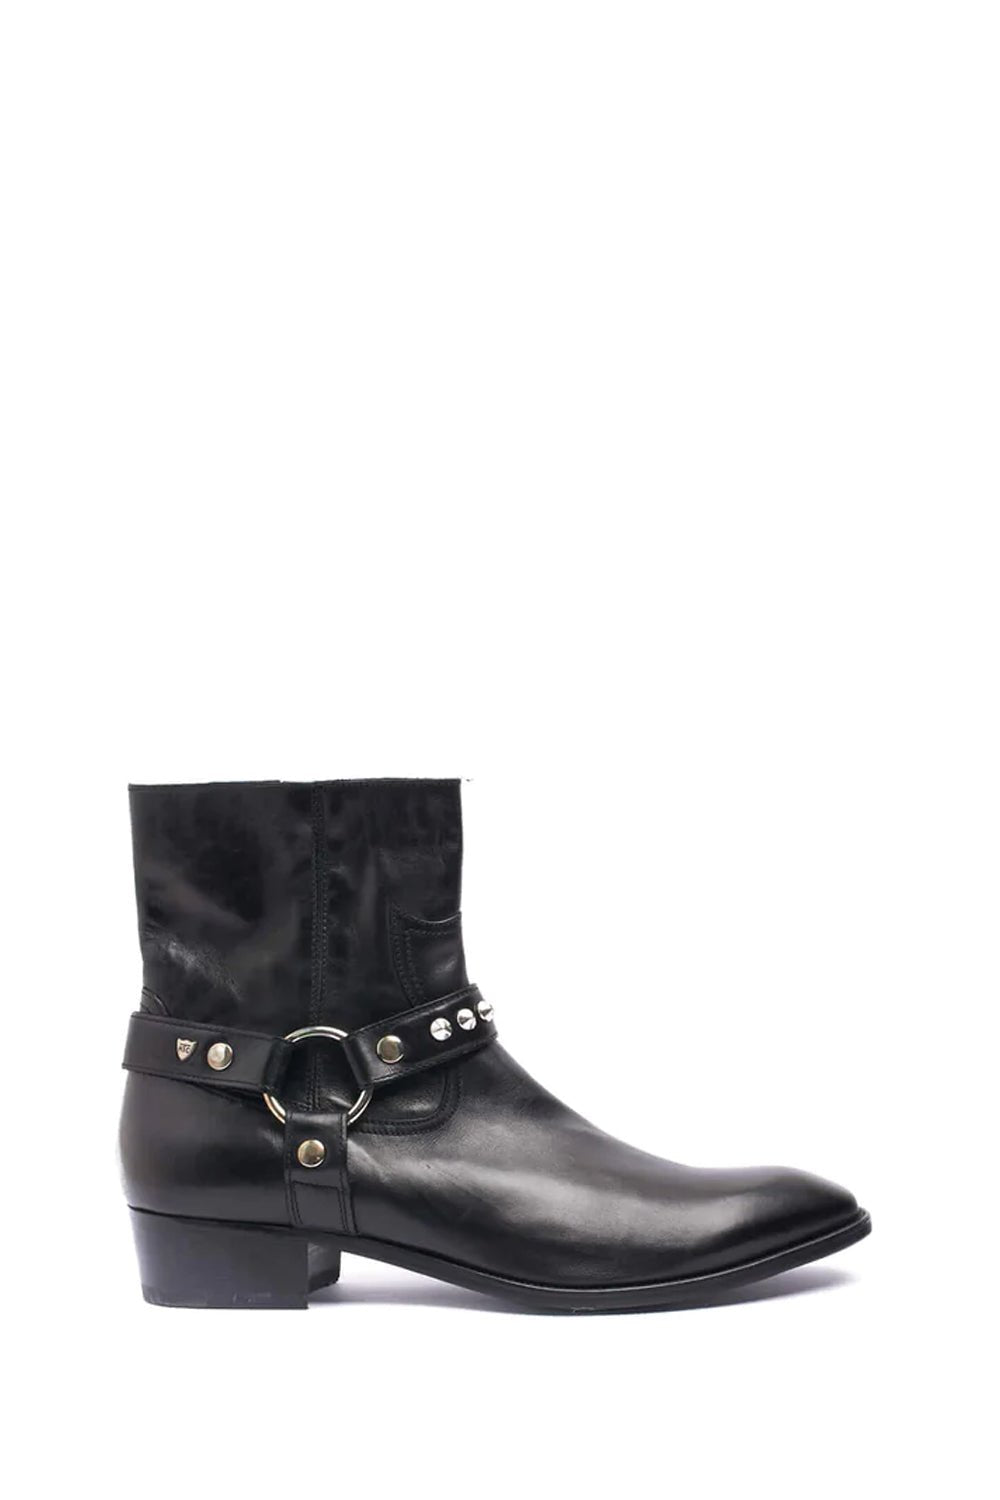 RING BOOT Black leather boots with studded strap, leather sole, made in Italy. HTC LOS ANGELES